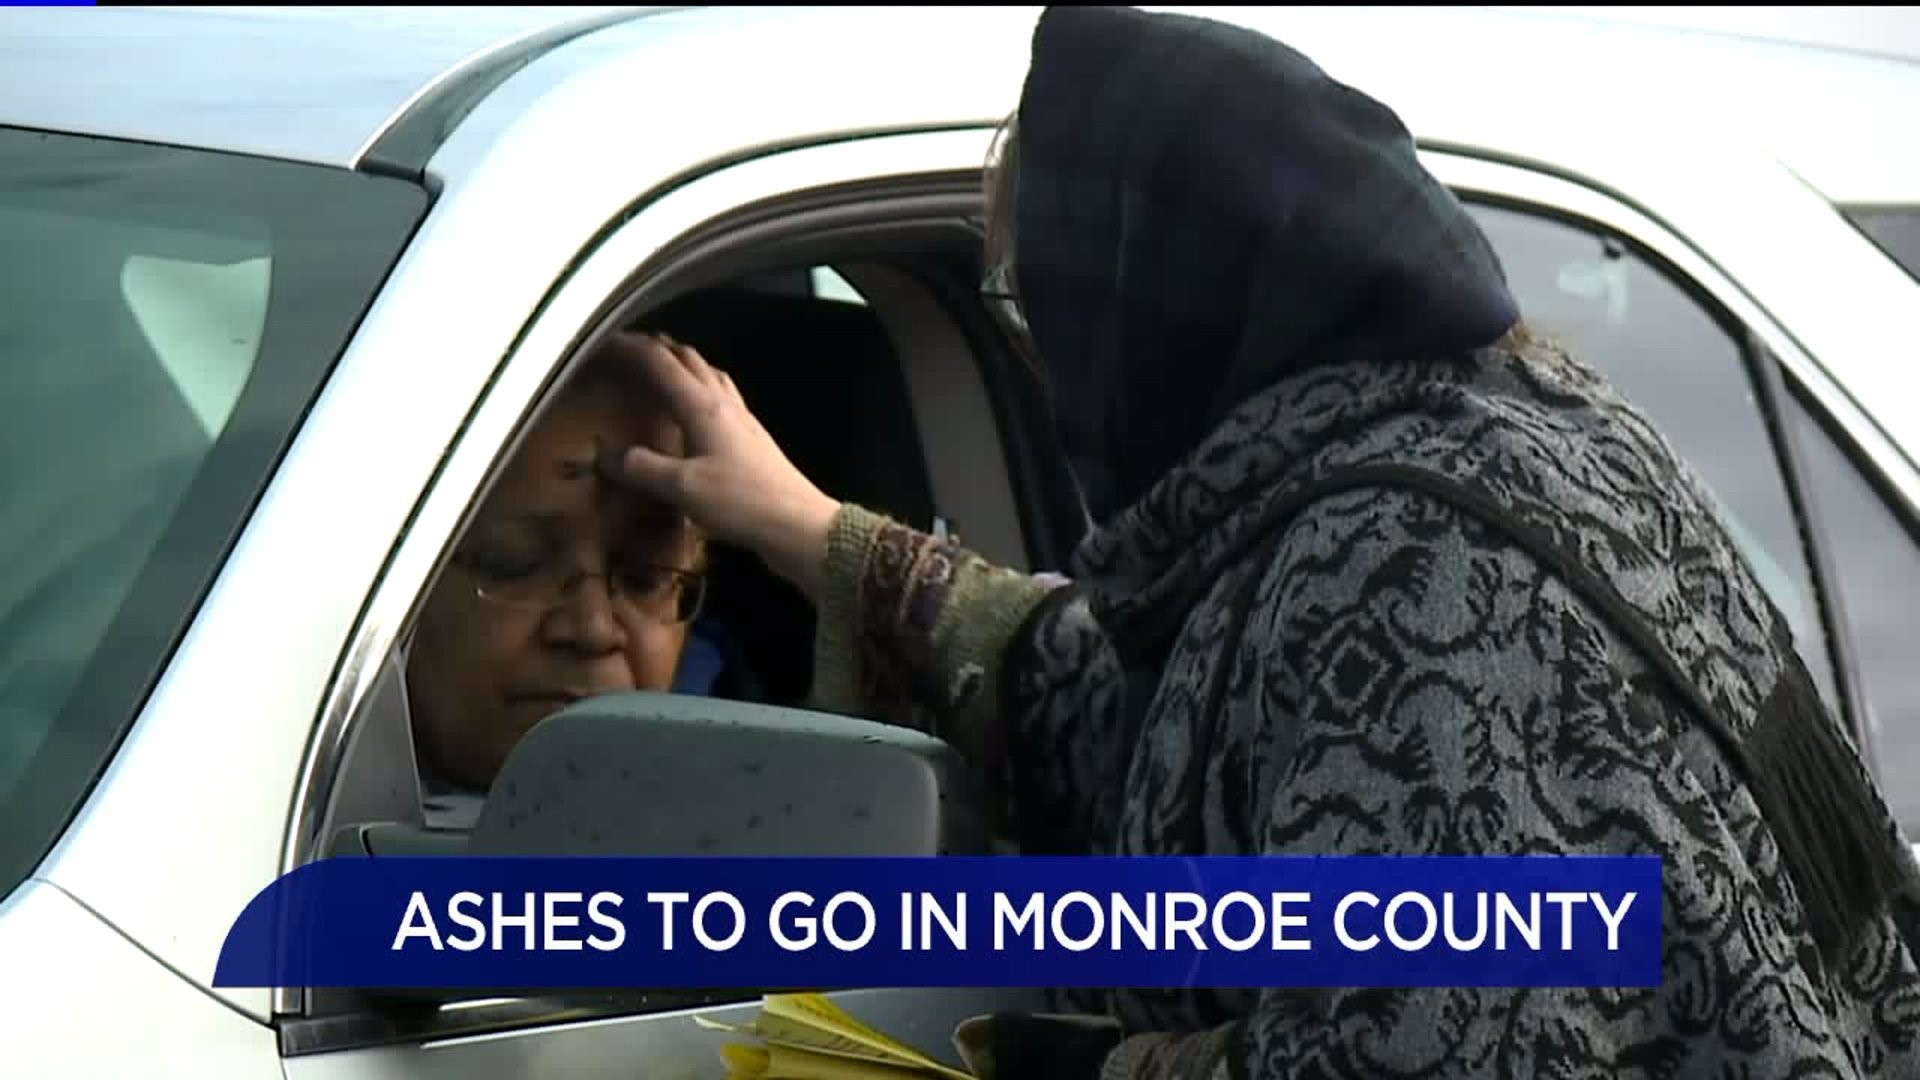 Ashes to Go in Monroe County